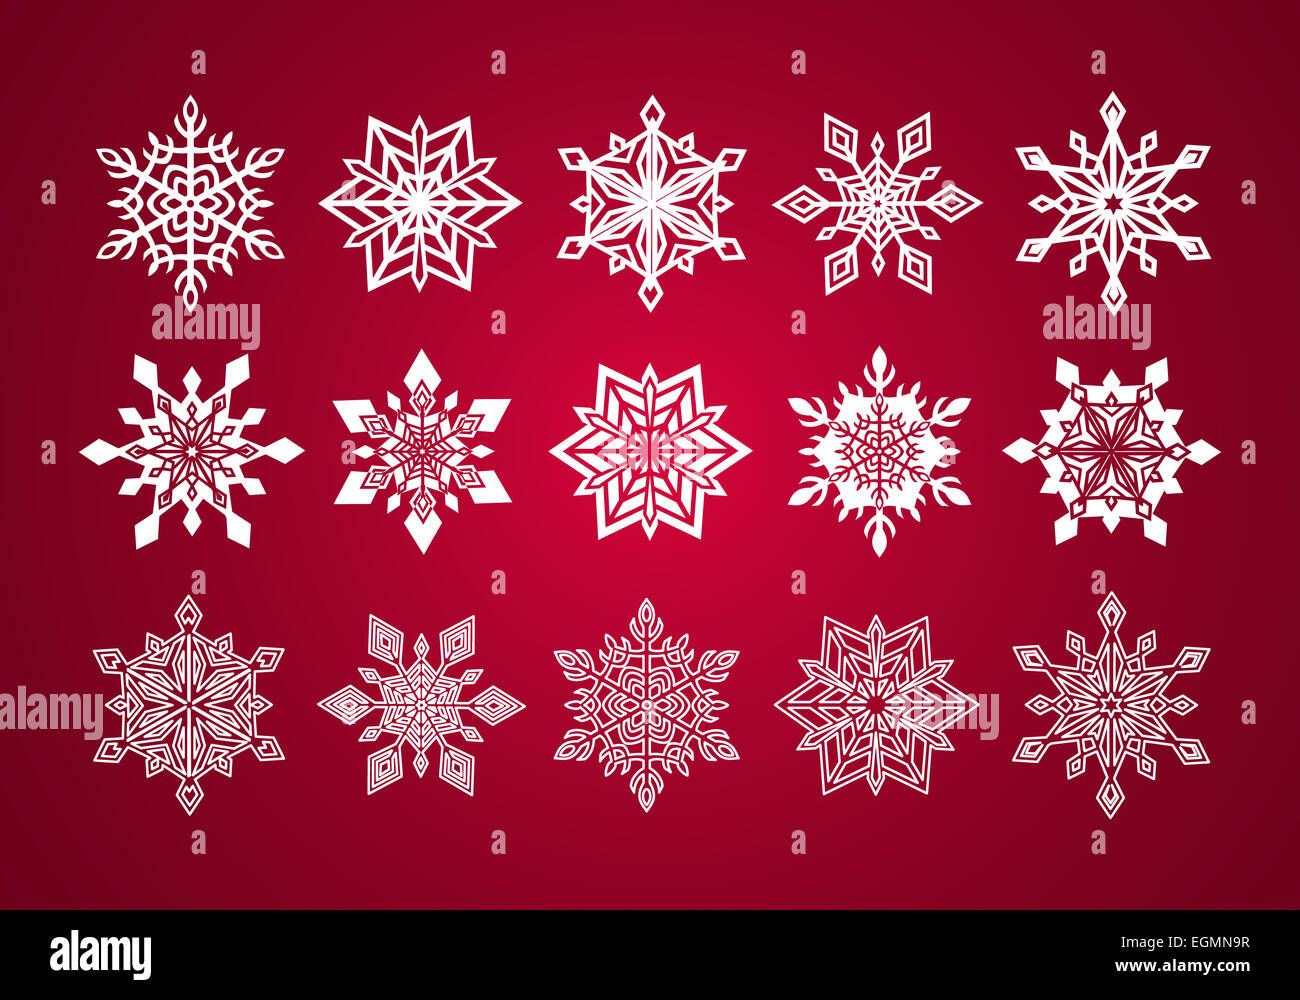 Set of Various Fine Lace Snowflakes for Christmas on Wine Red Background Stock Photo